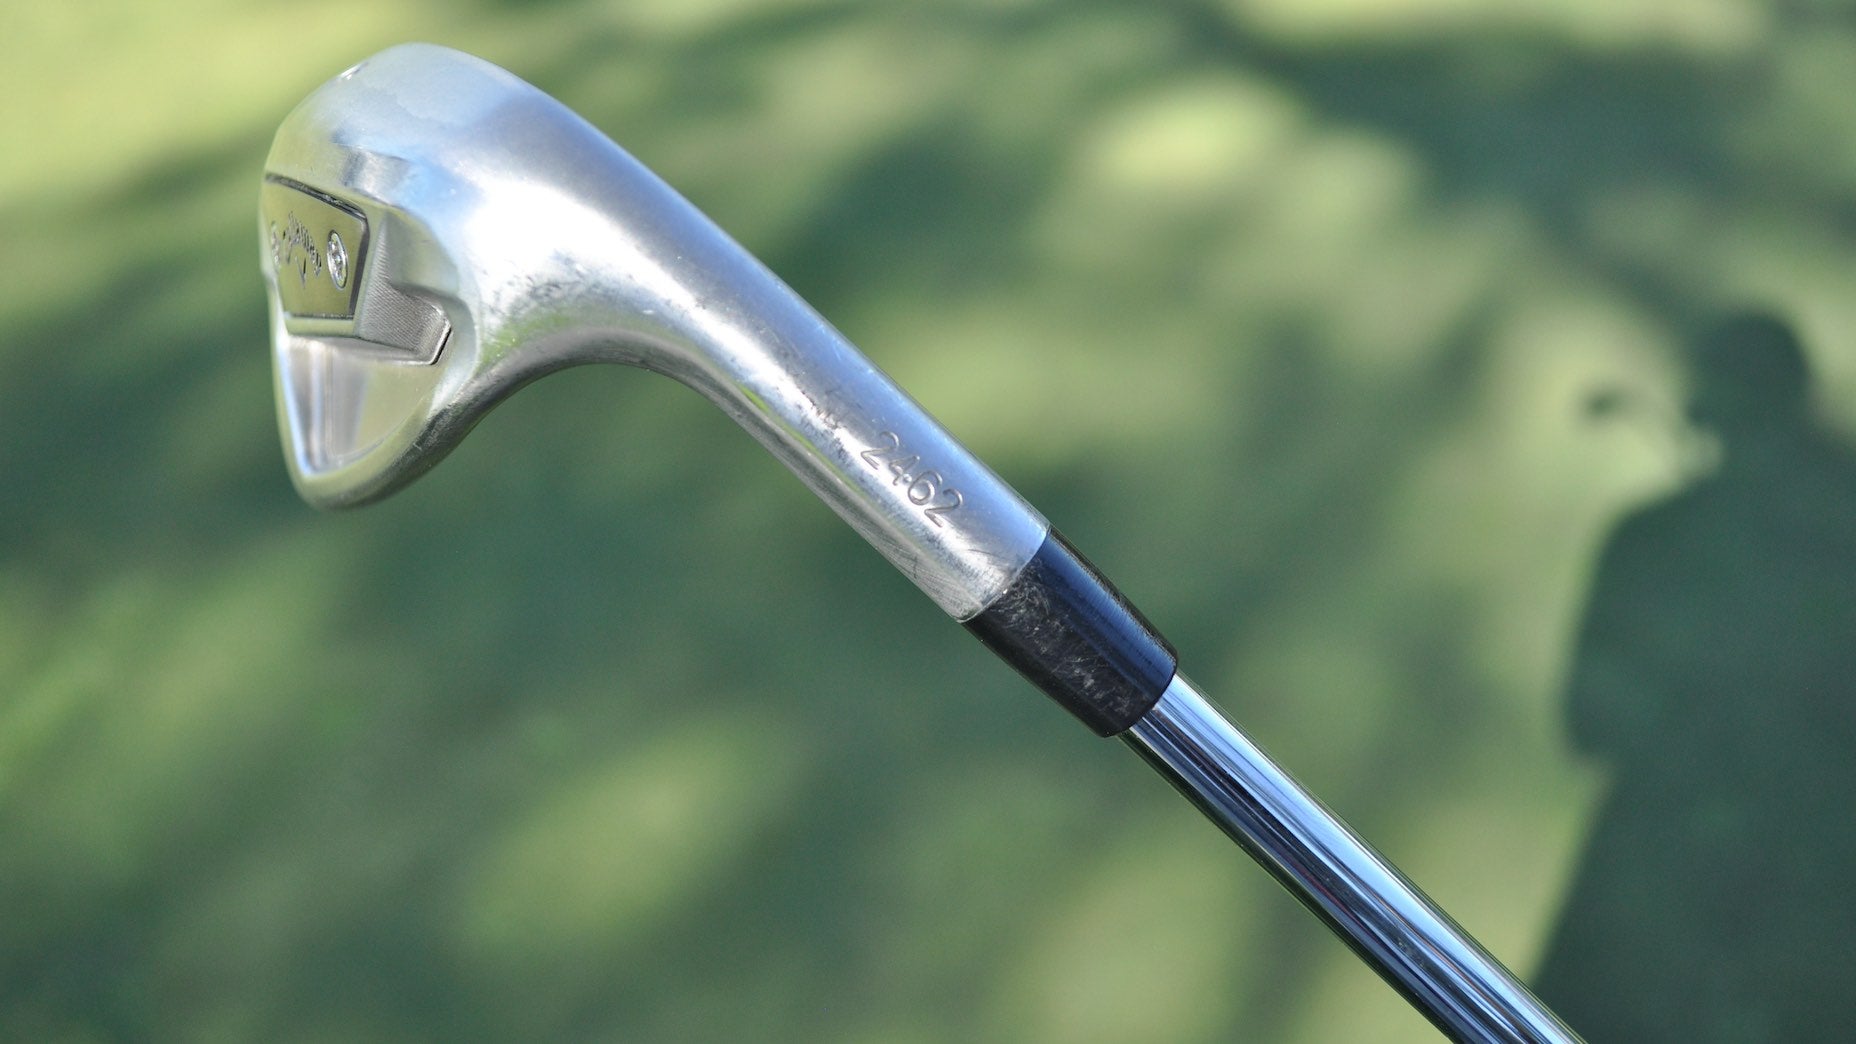 Dylan Frittelli is the only pro in the world using this $4K Callaway wedge